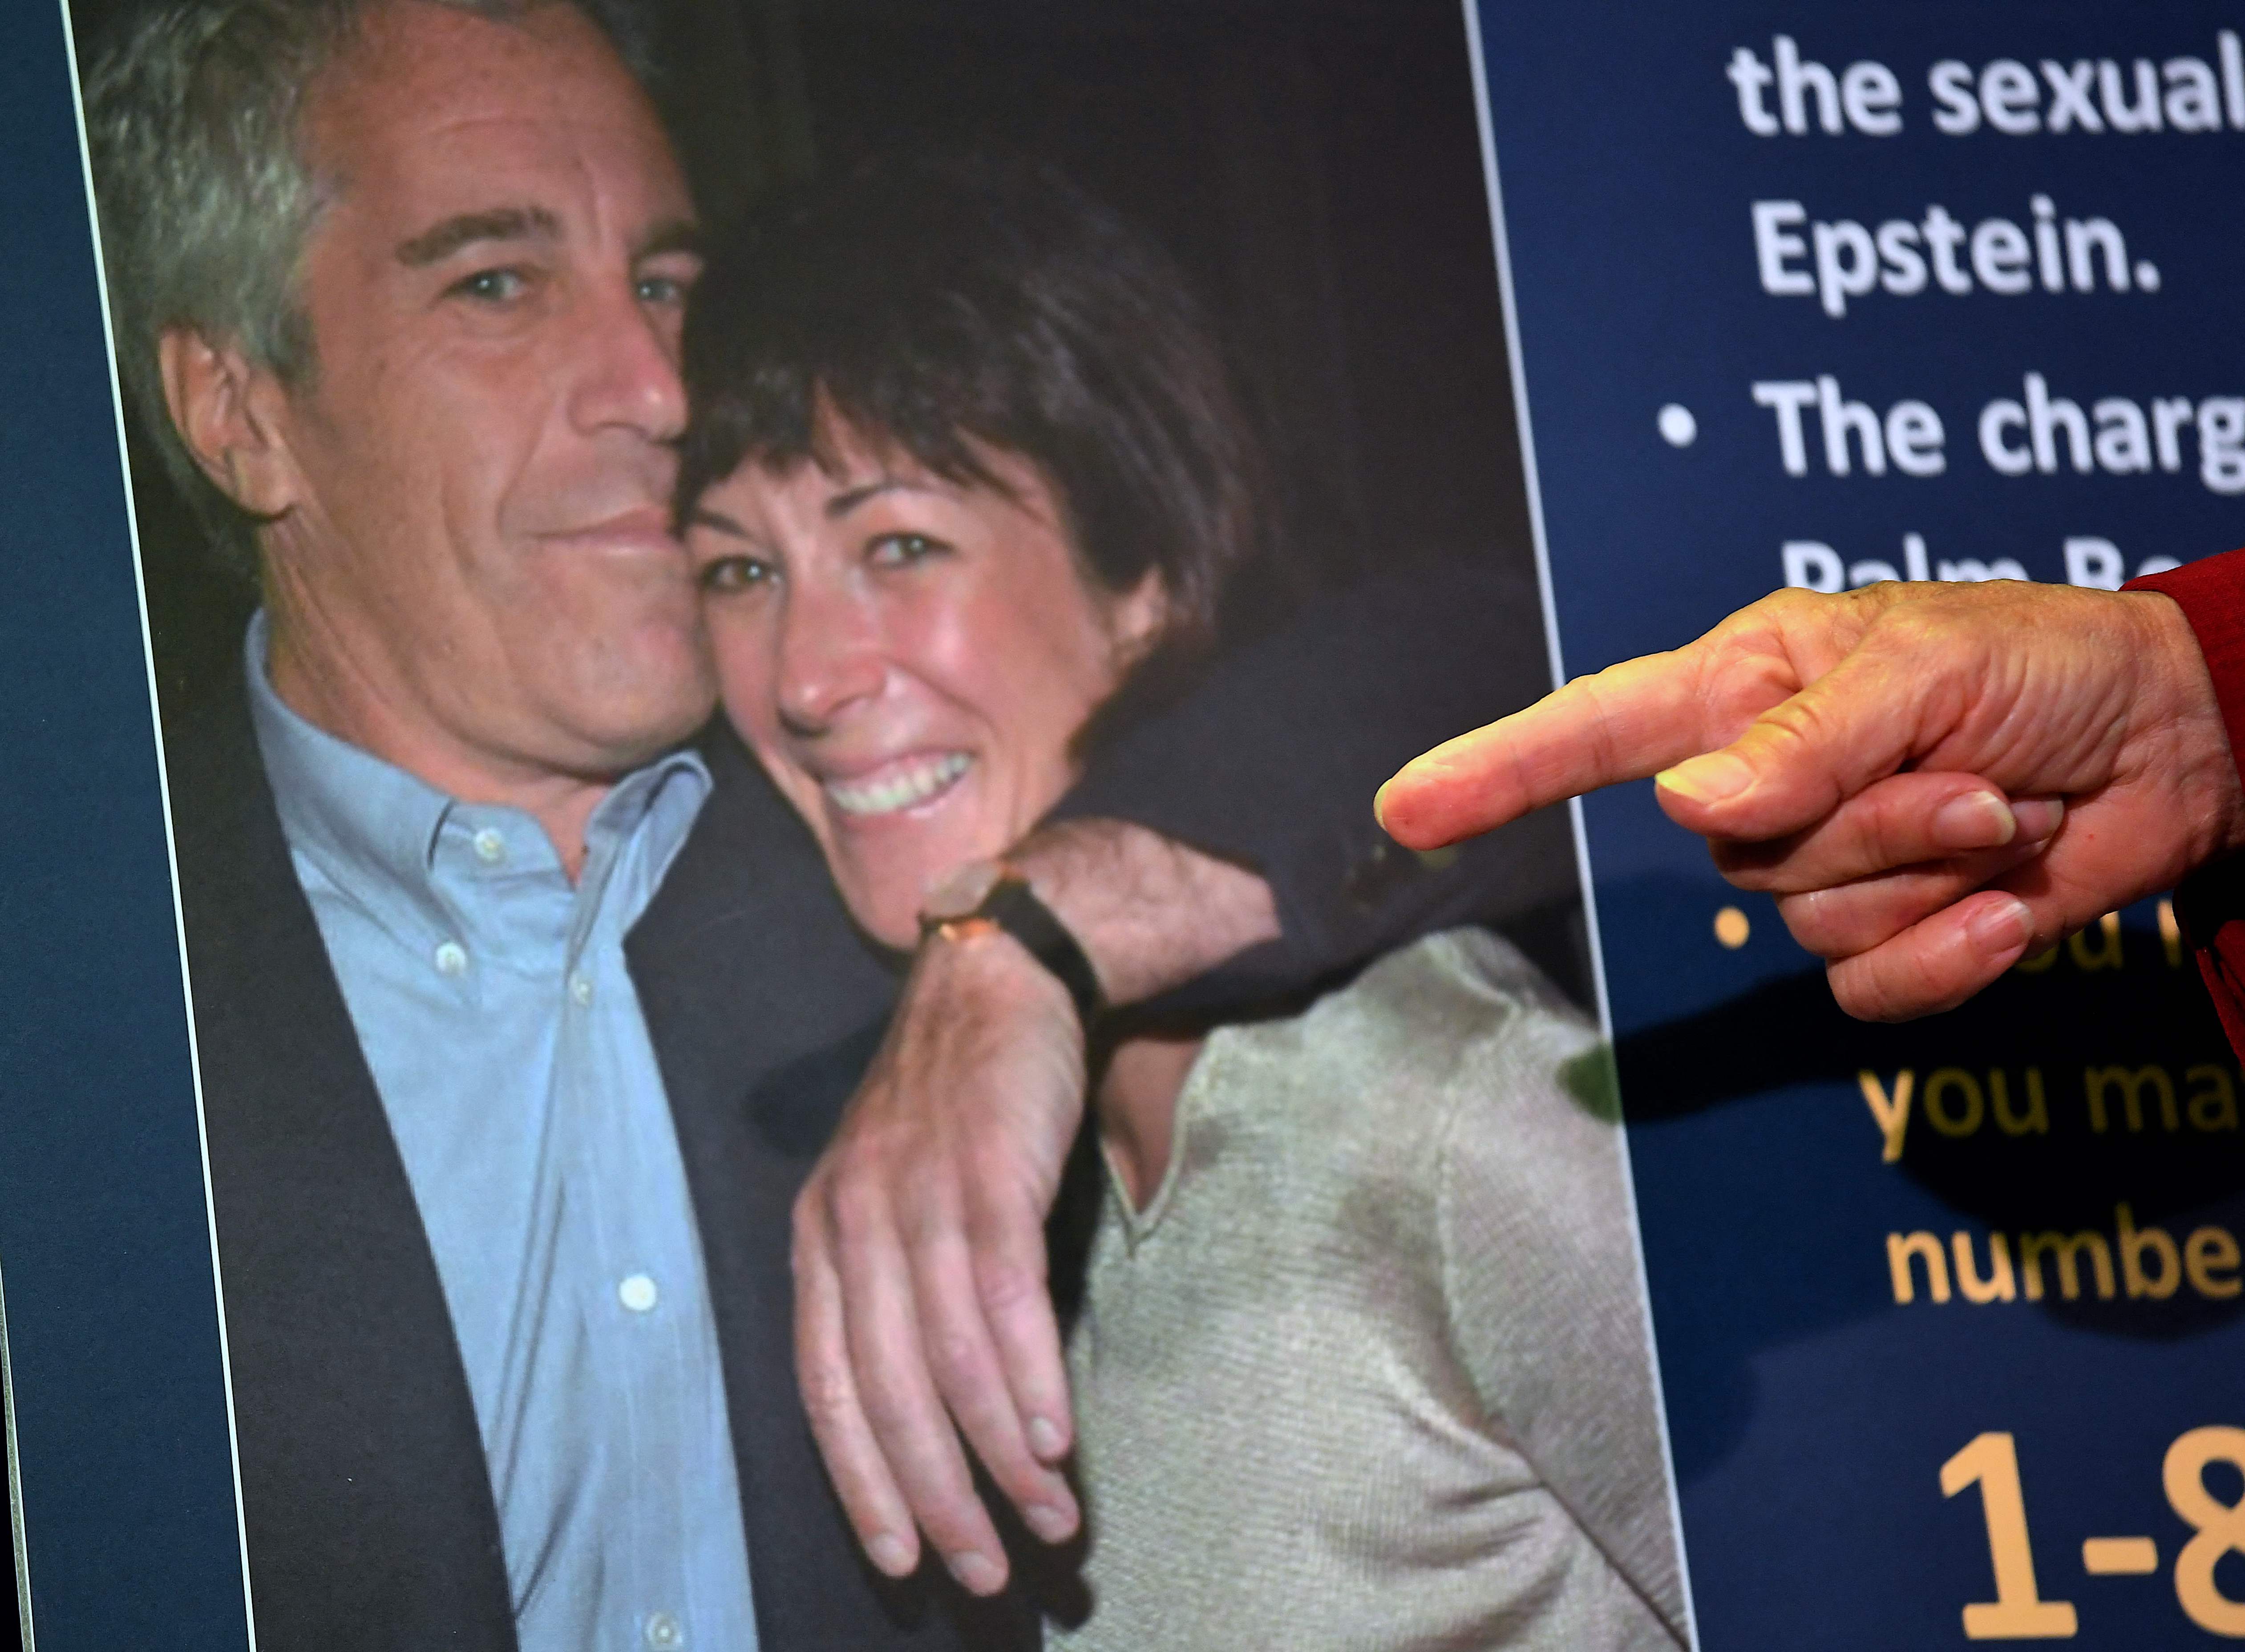 Maxwell began helping Epstein in his sexual exploitation of underage girls in 1994, prosectors said